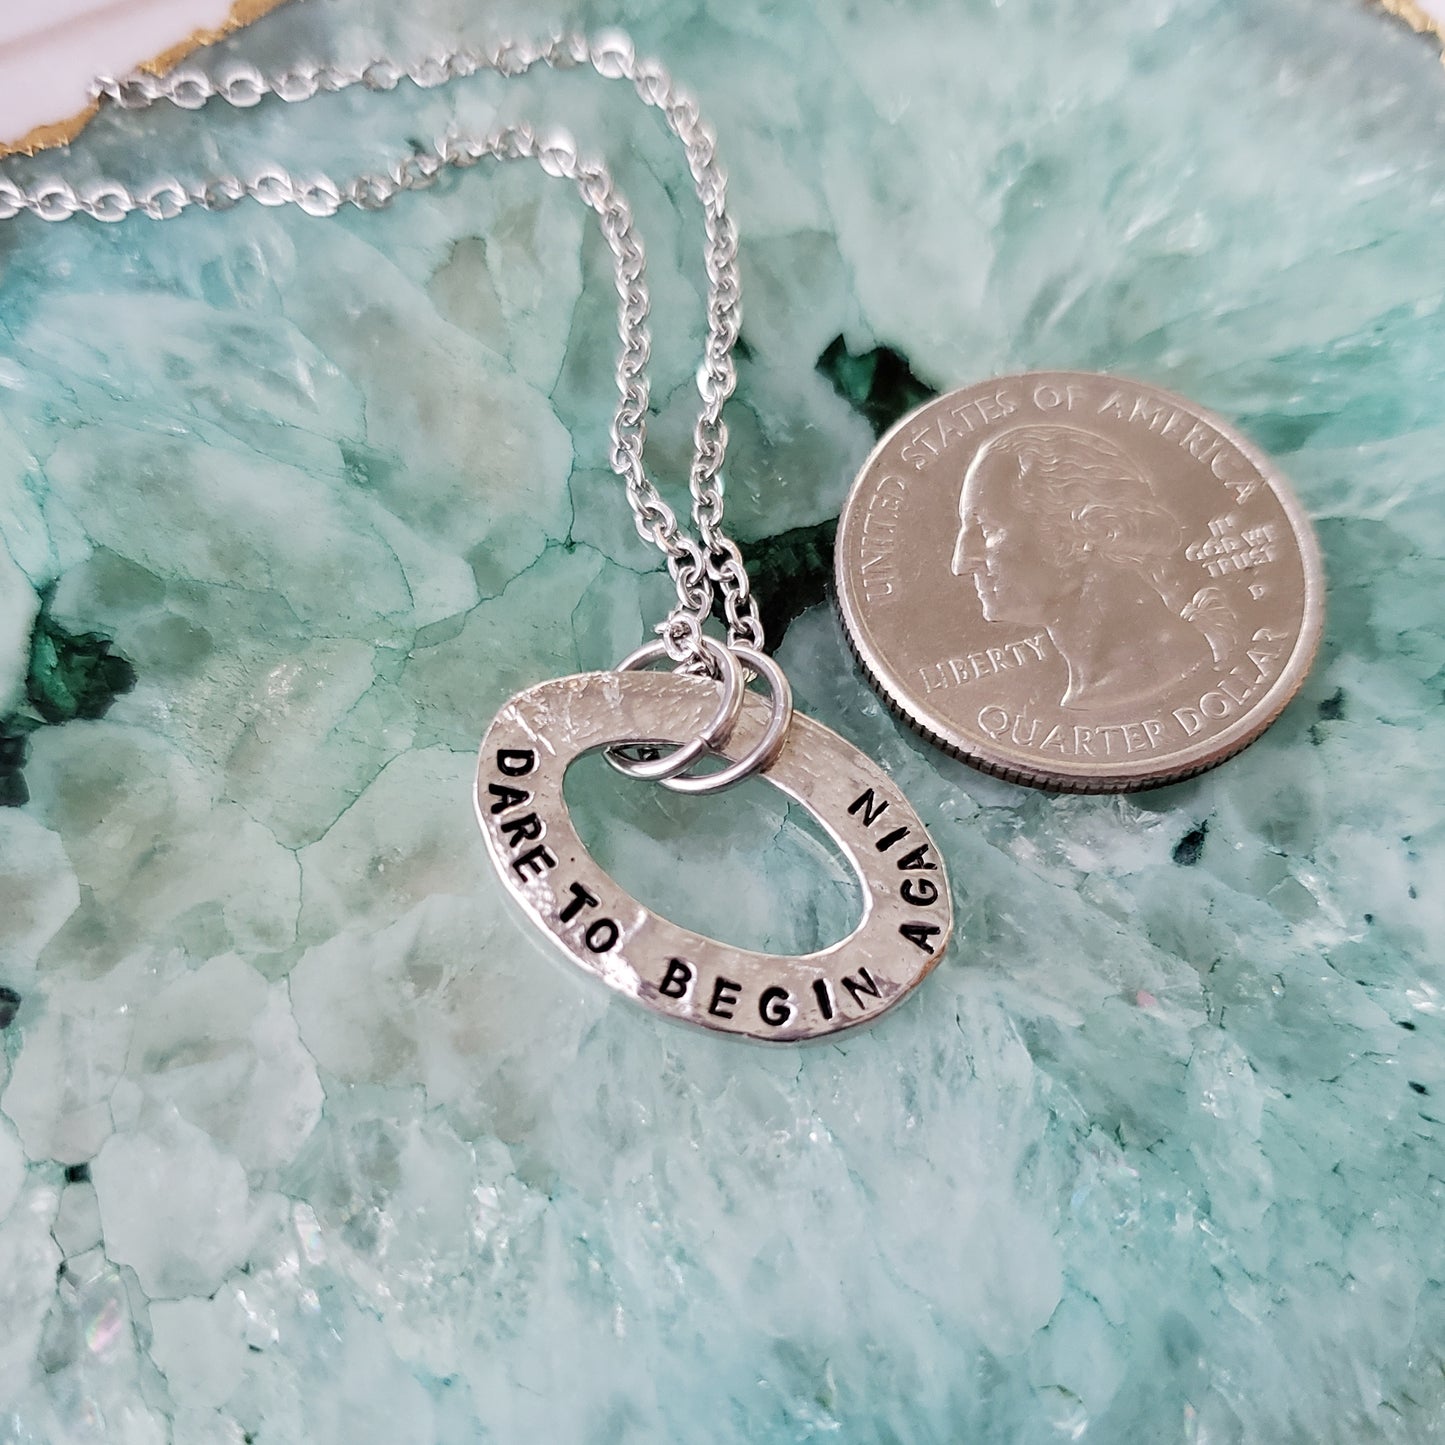 Dare To Begin Again Pewter Washer Necklace